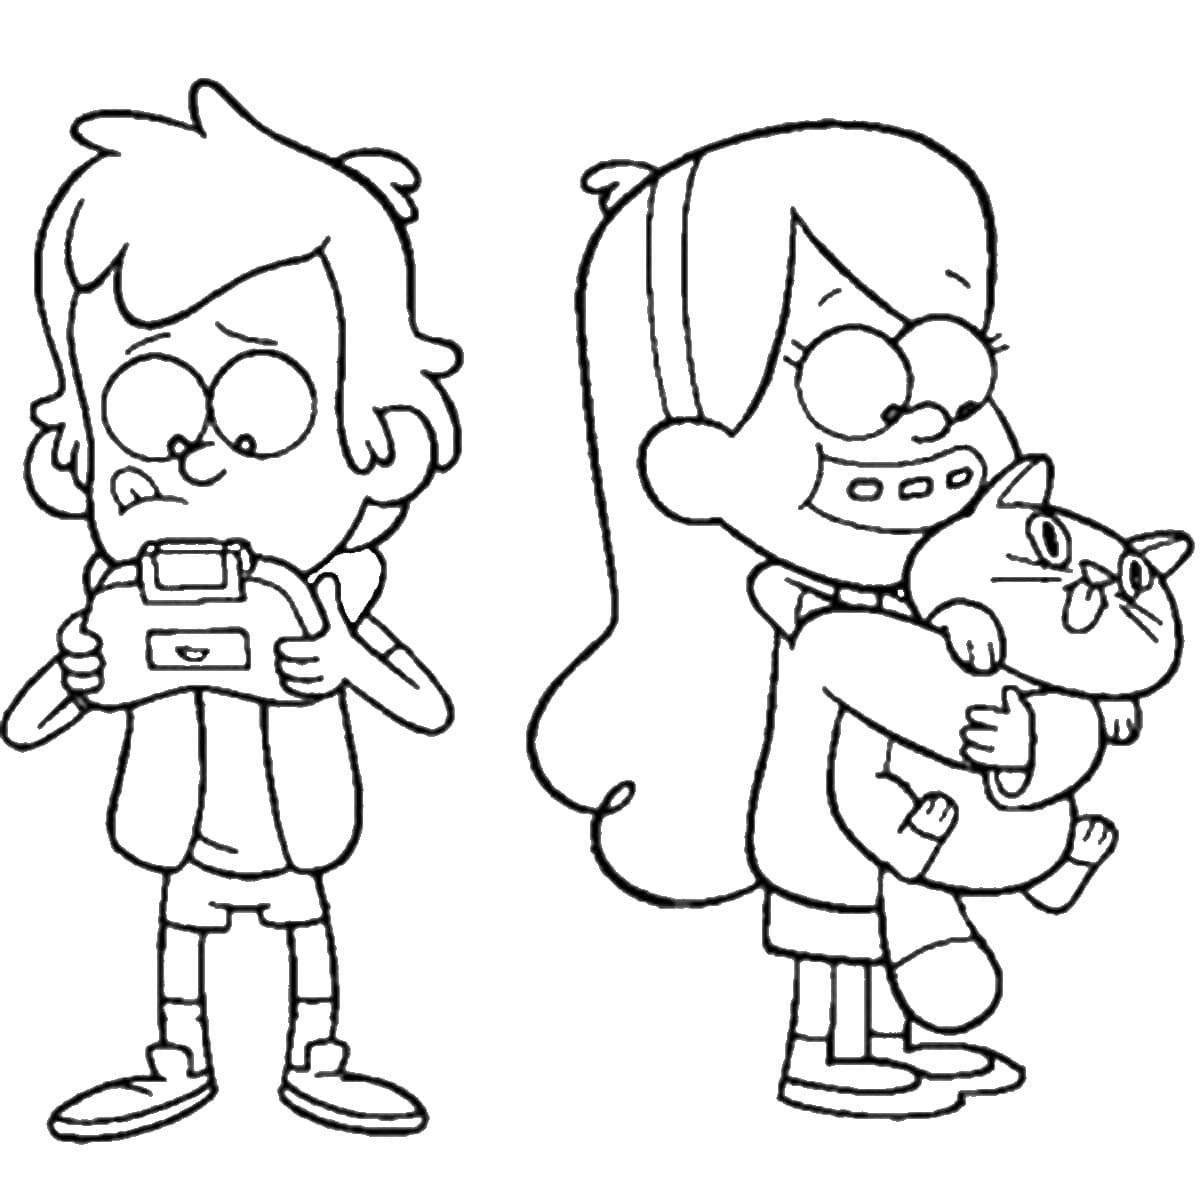 Glowing mabel coloring page